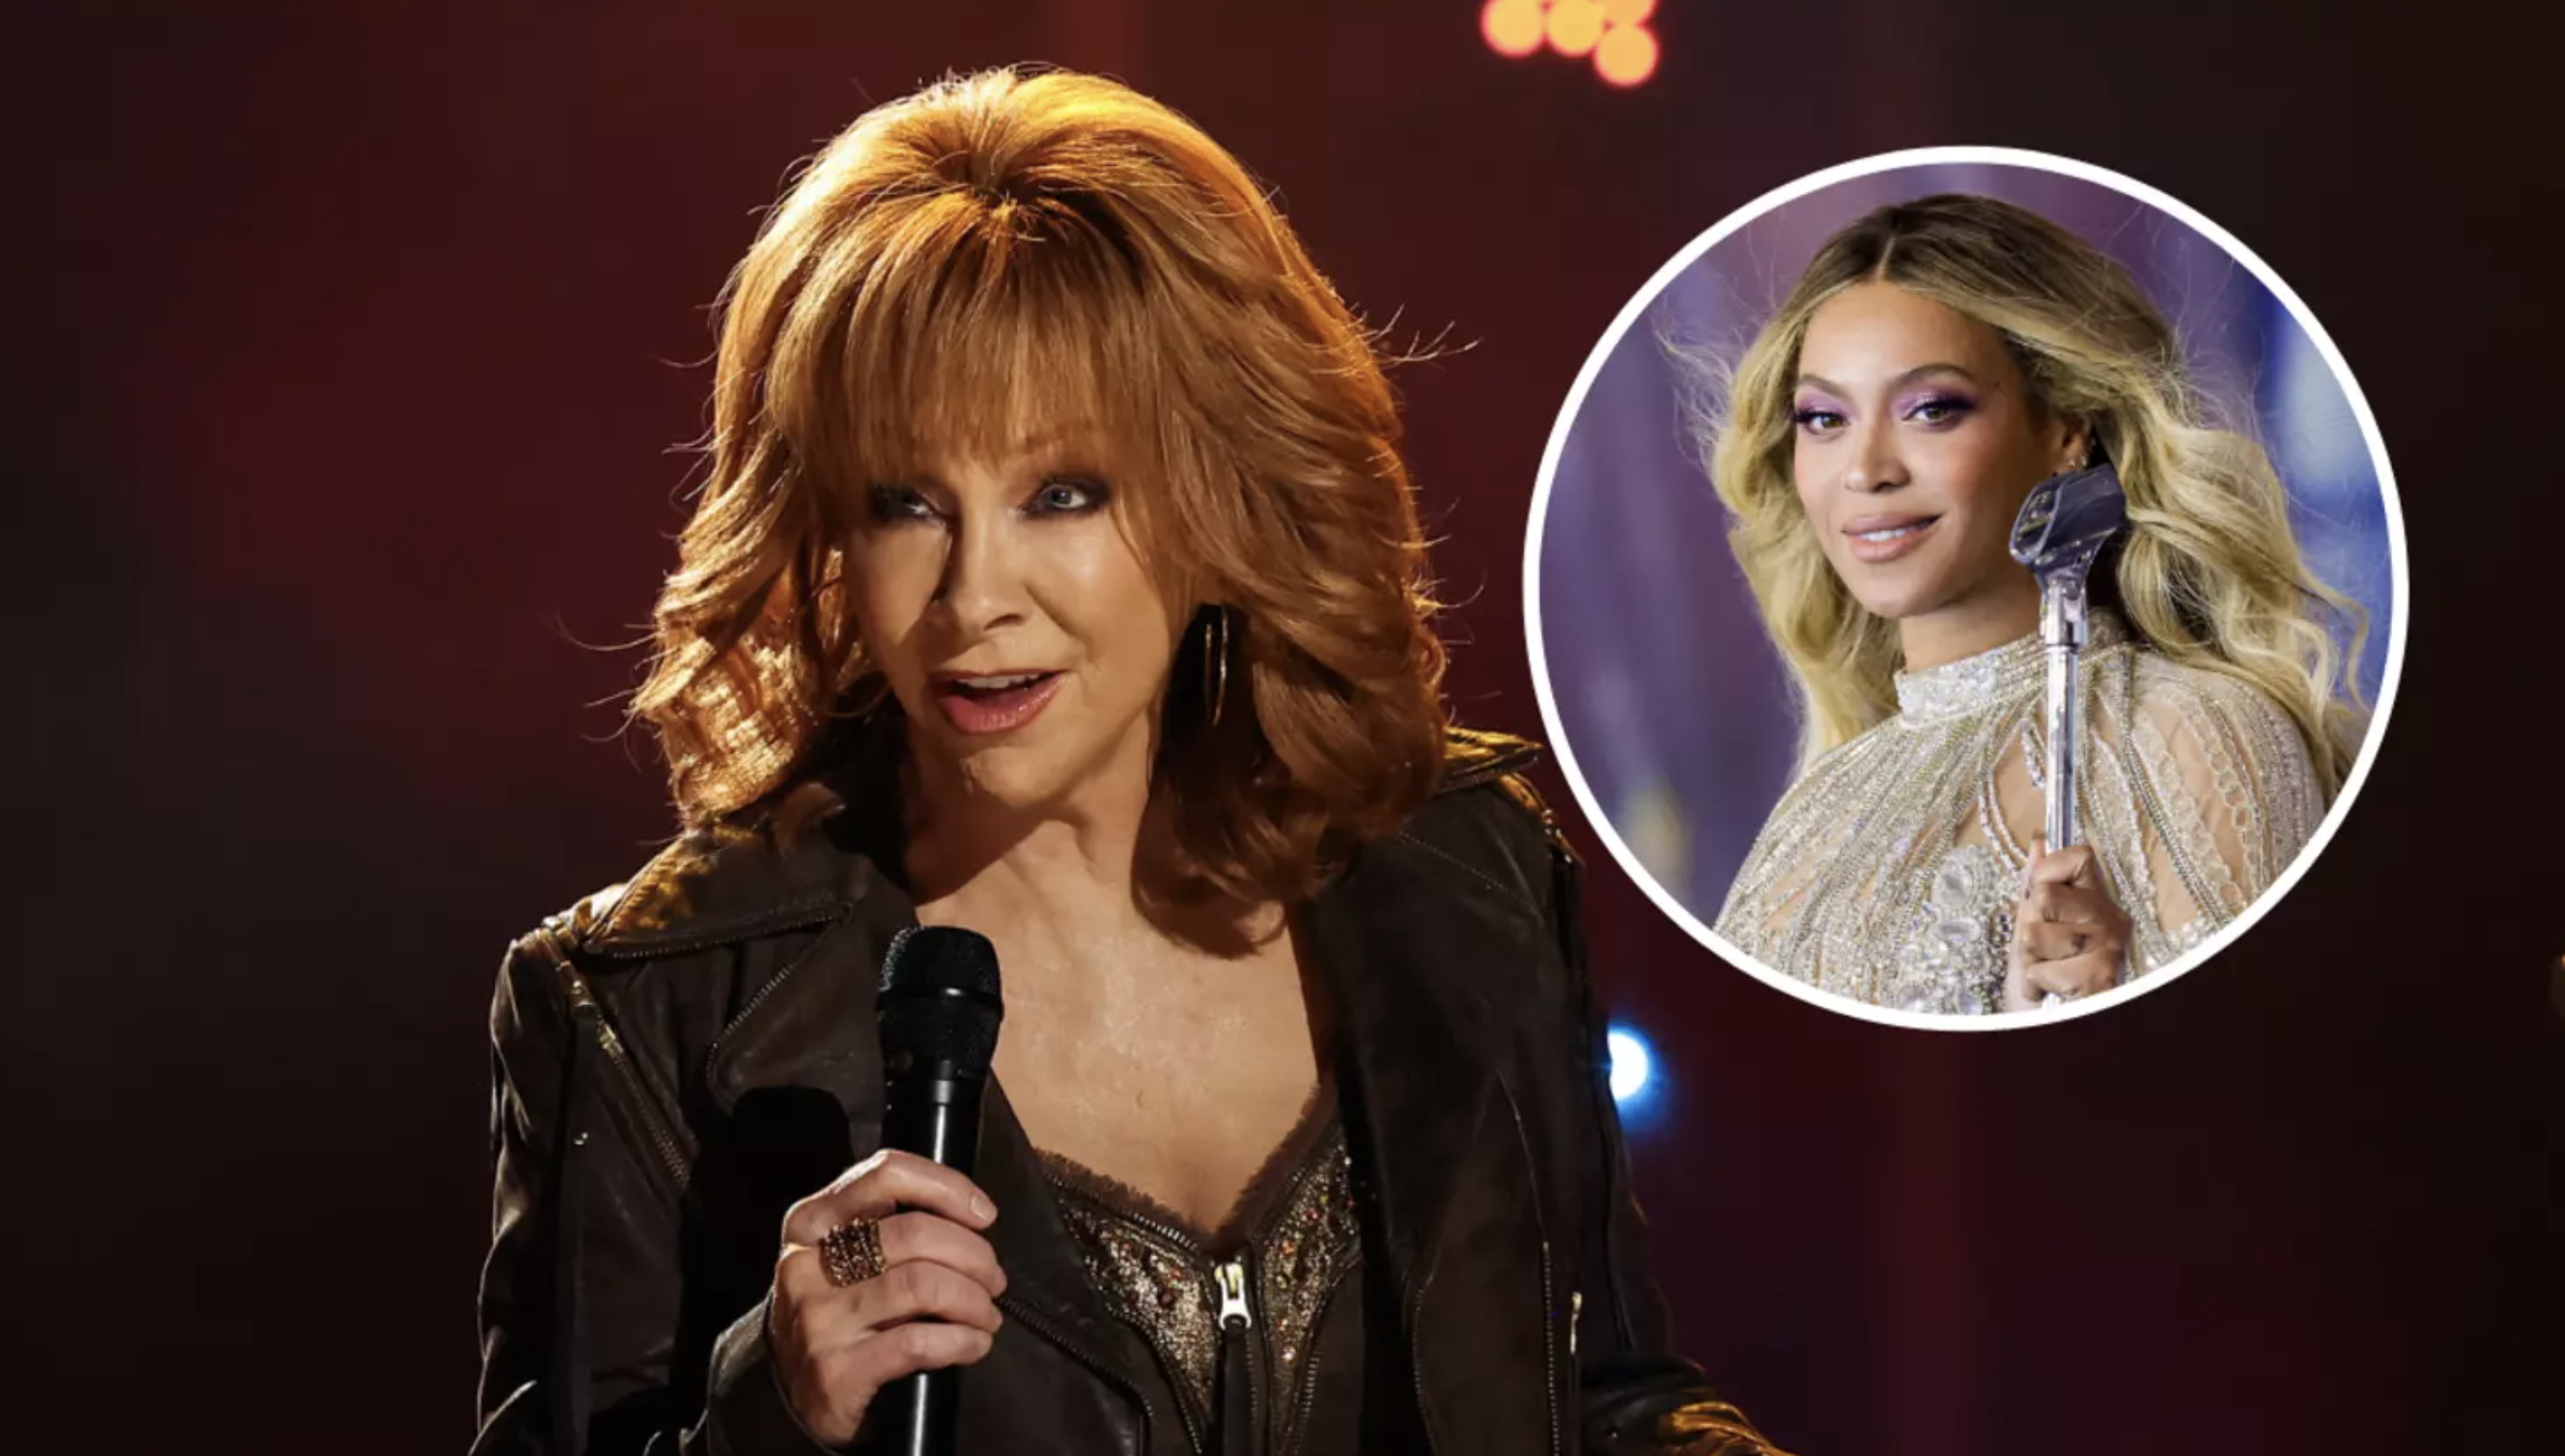 Reba McEntire Highlights Persistent Gender Disparity in Country Music.